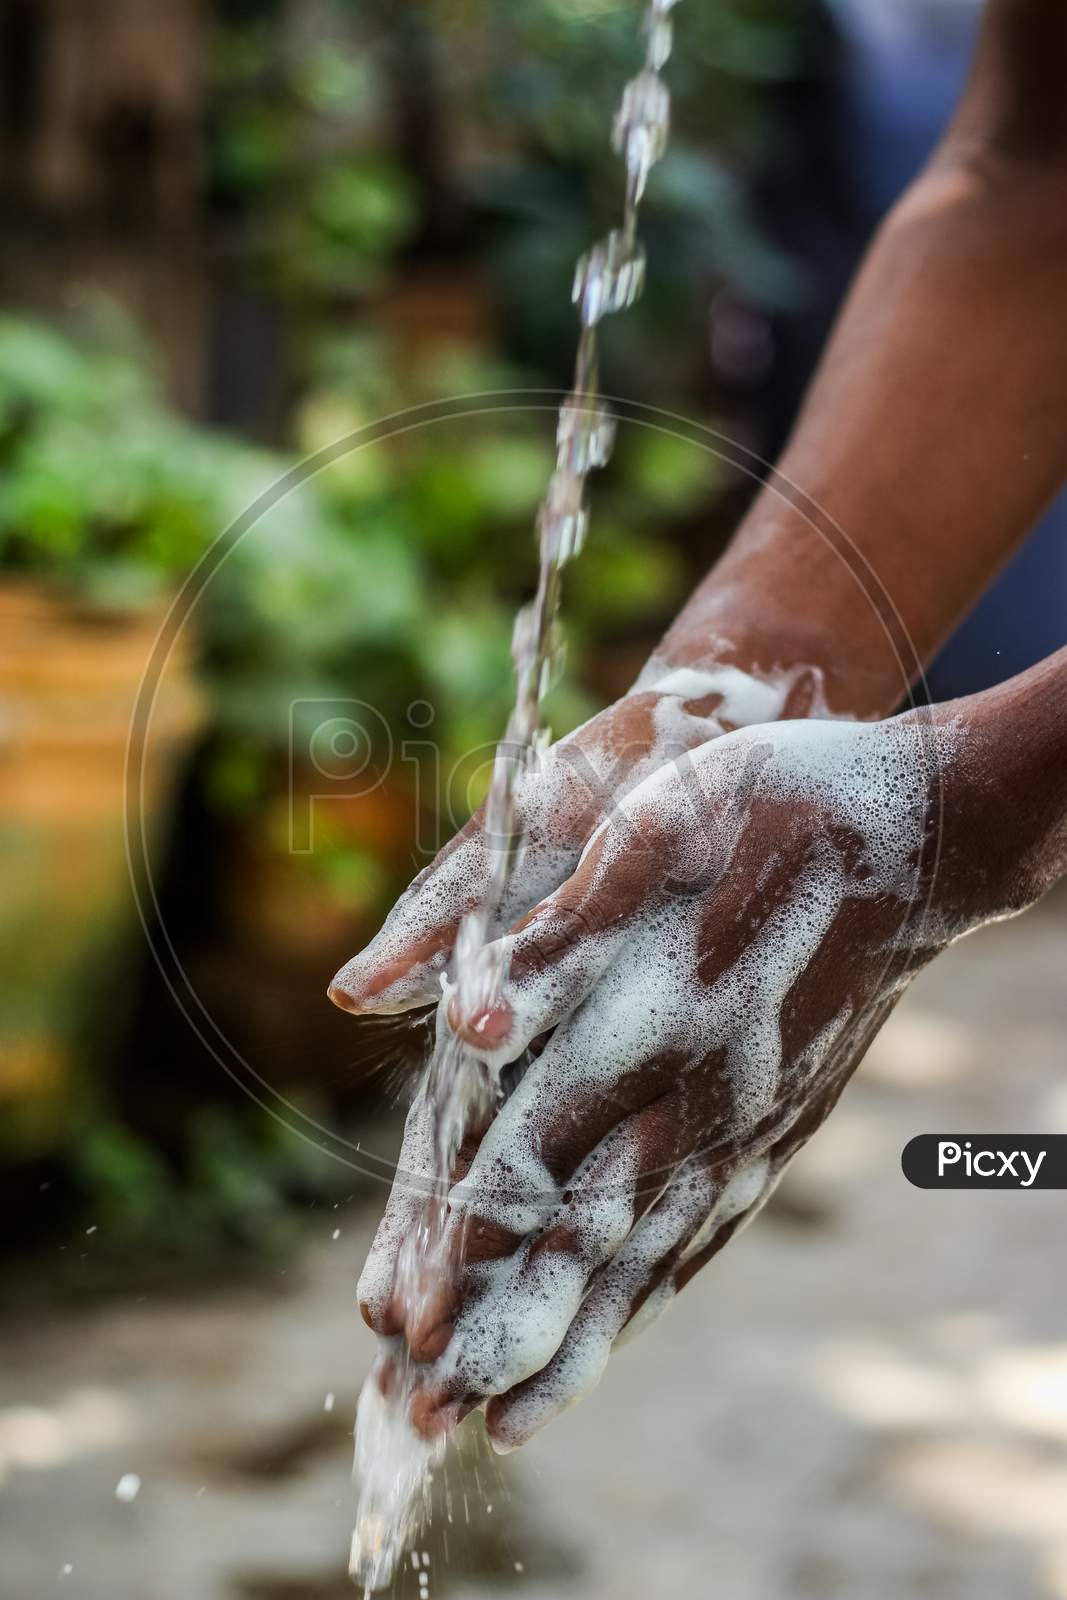 Washing Hands.Man Washing His Hands In The Garden At Home.Coronavirus Pandemic Prevention Wash Hands With Soap Warm Water And , Rubbing Nails And Fingers Washing Frequently. Hygiene & Cleaning Hands.